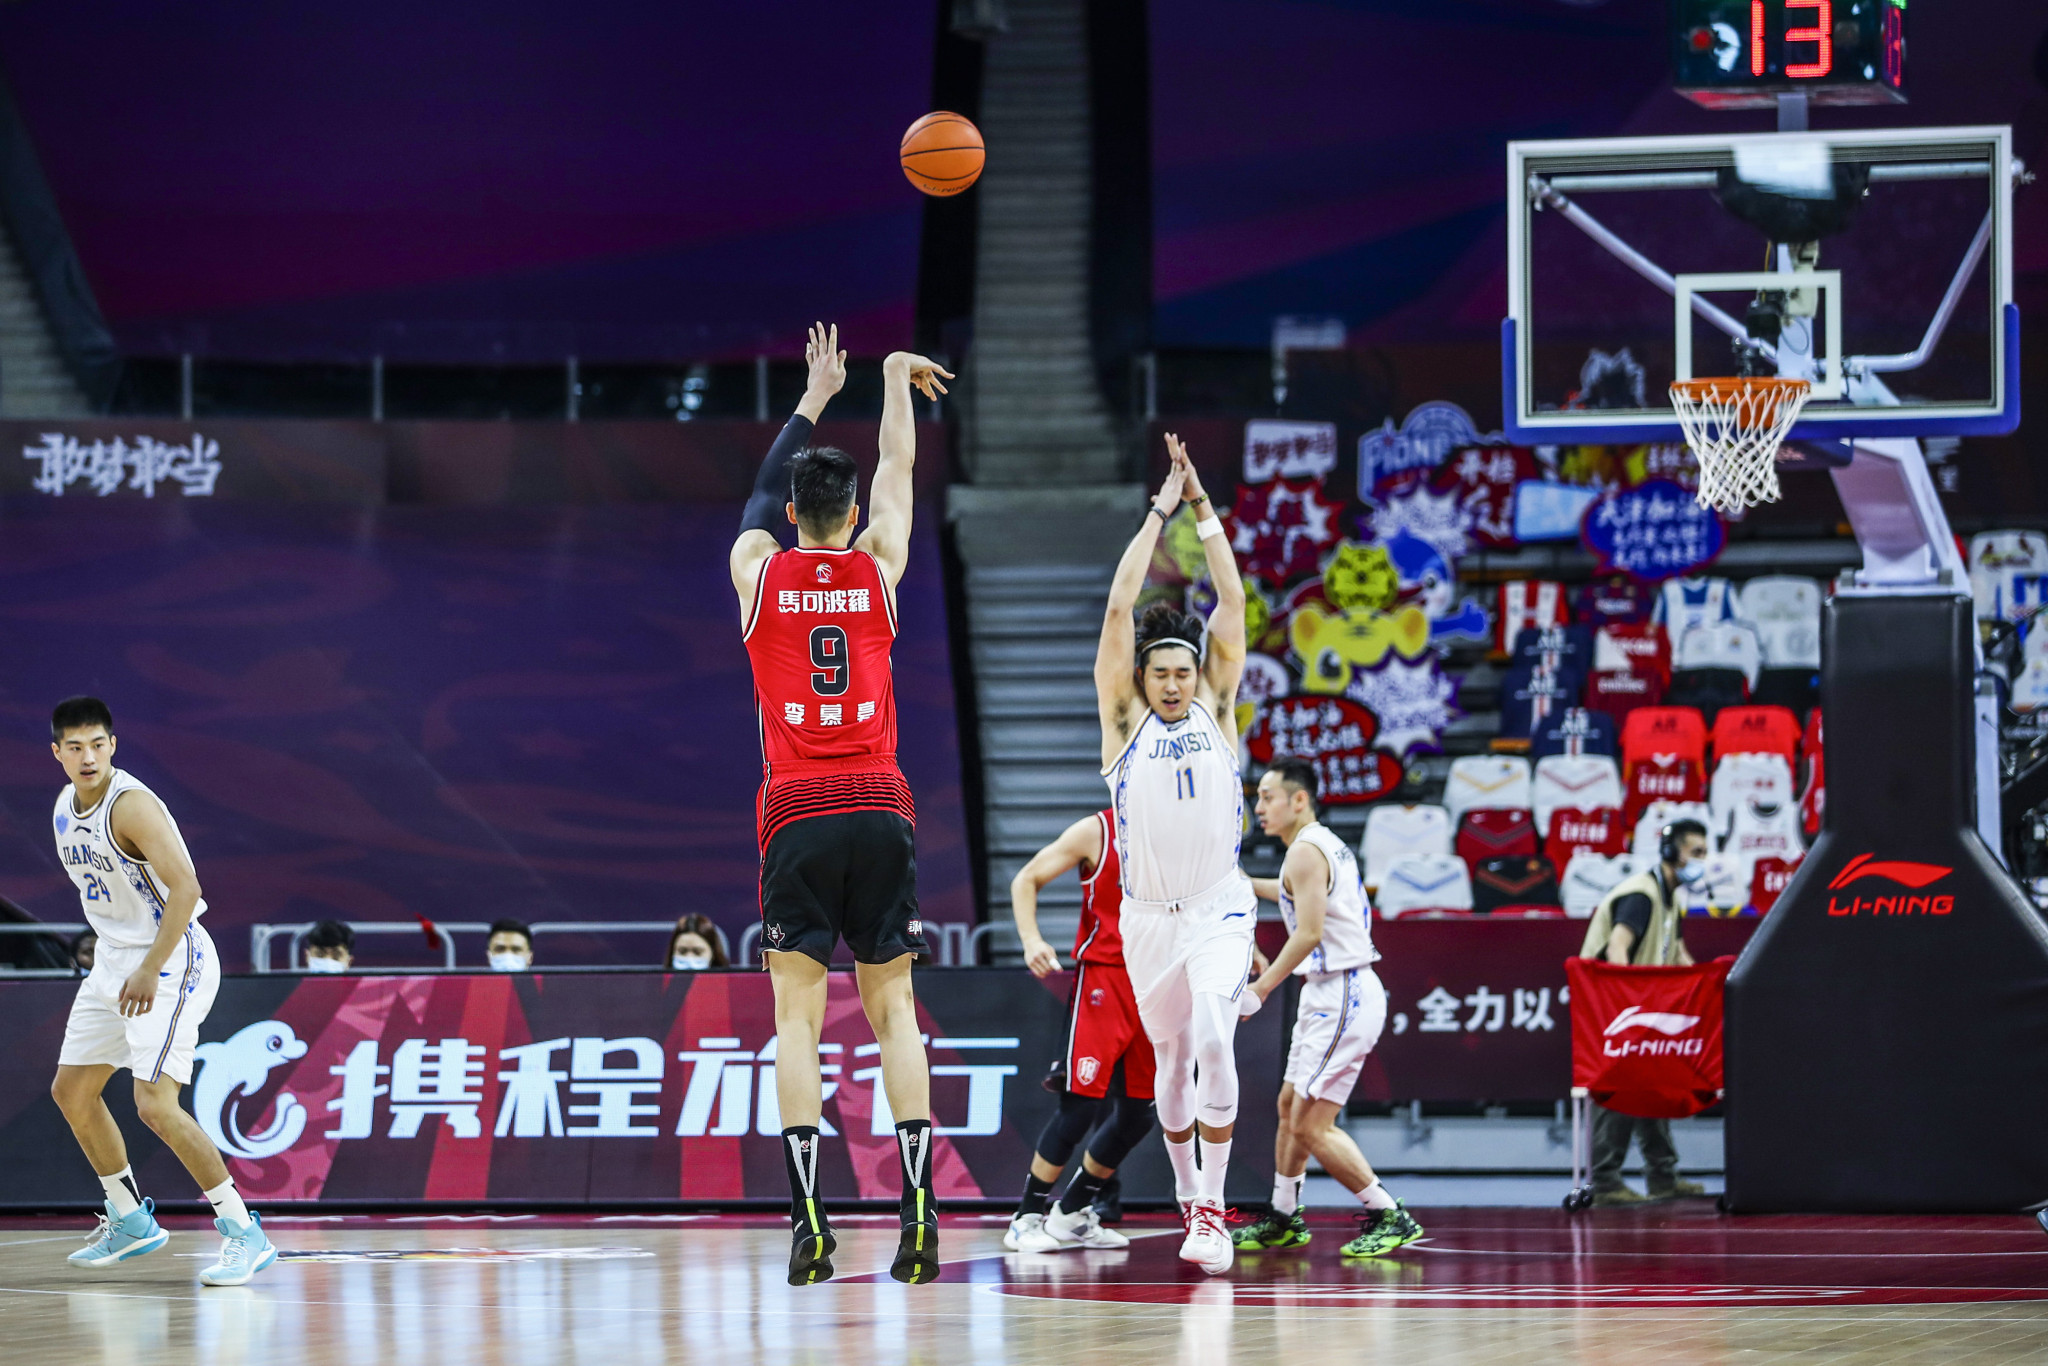 Chinese Basketball Association chief Wang resigns from role